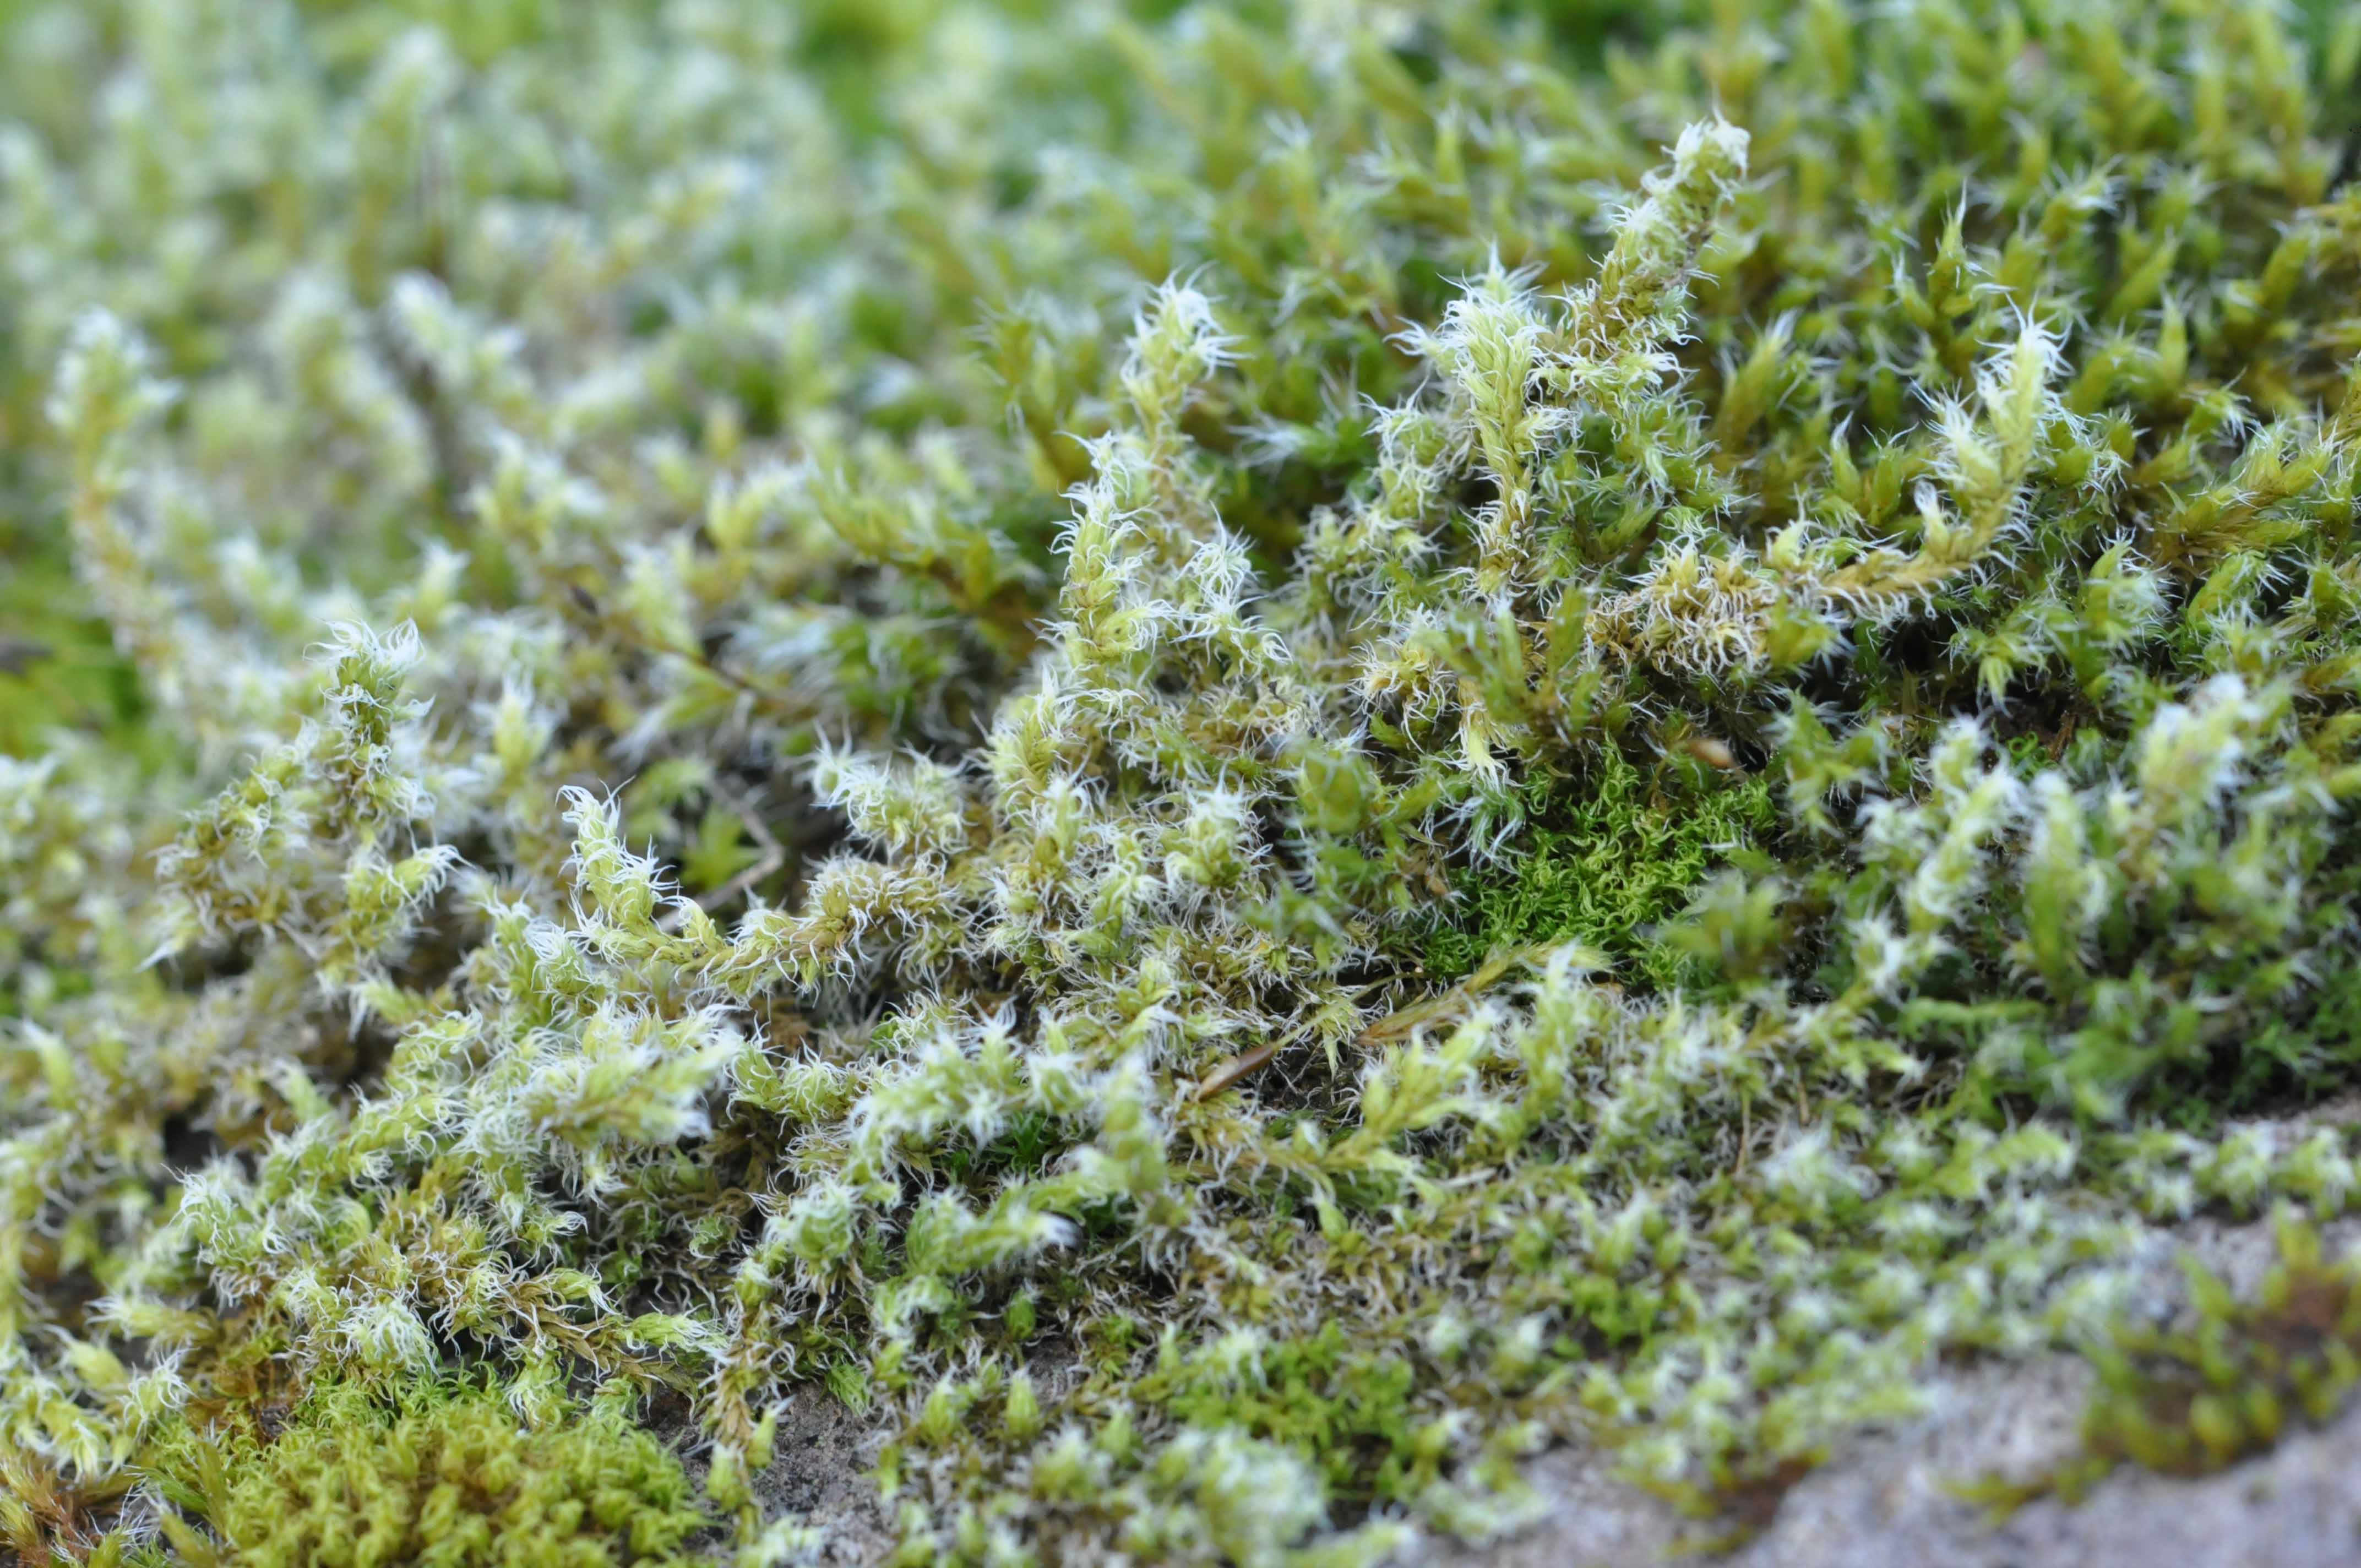 https://northwestwildlifeonline.com/nw-moss-from-big-to-really-small/